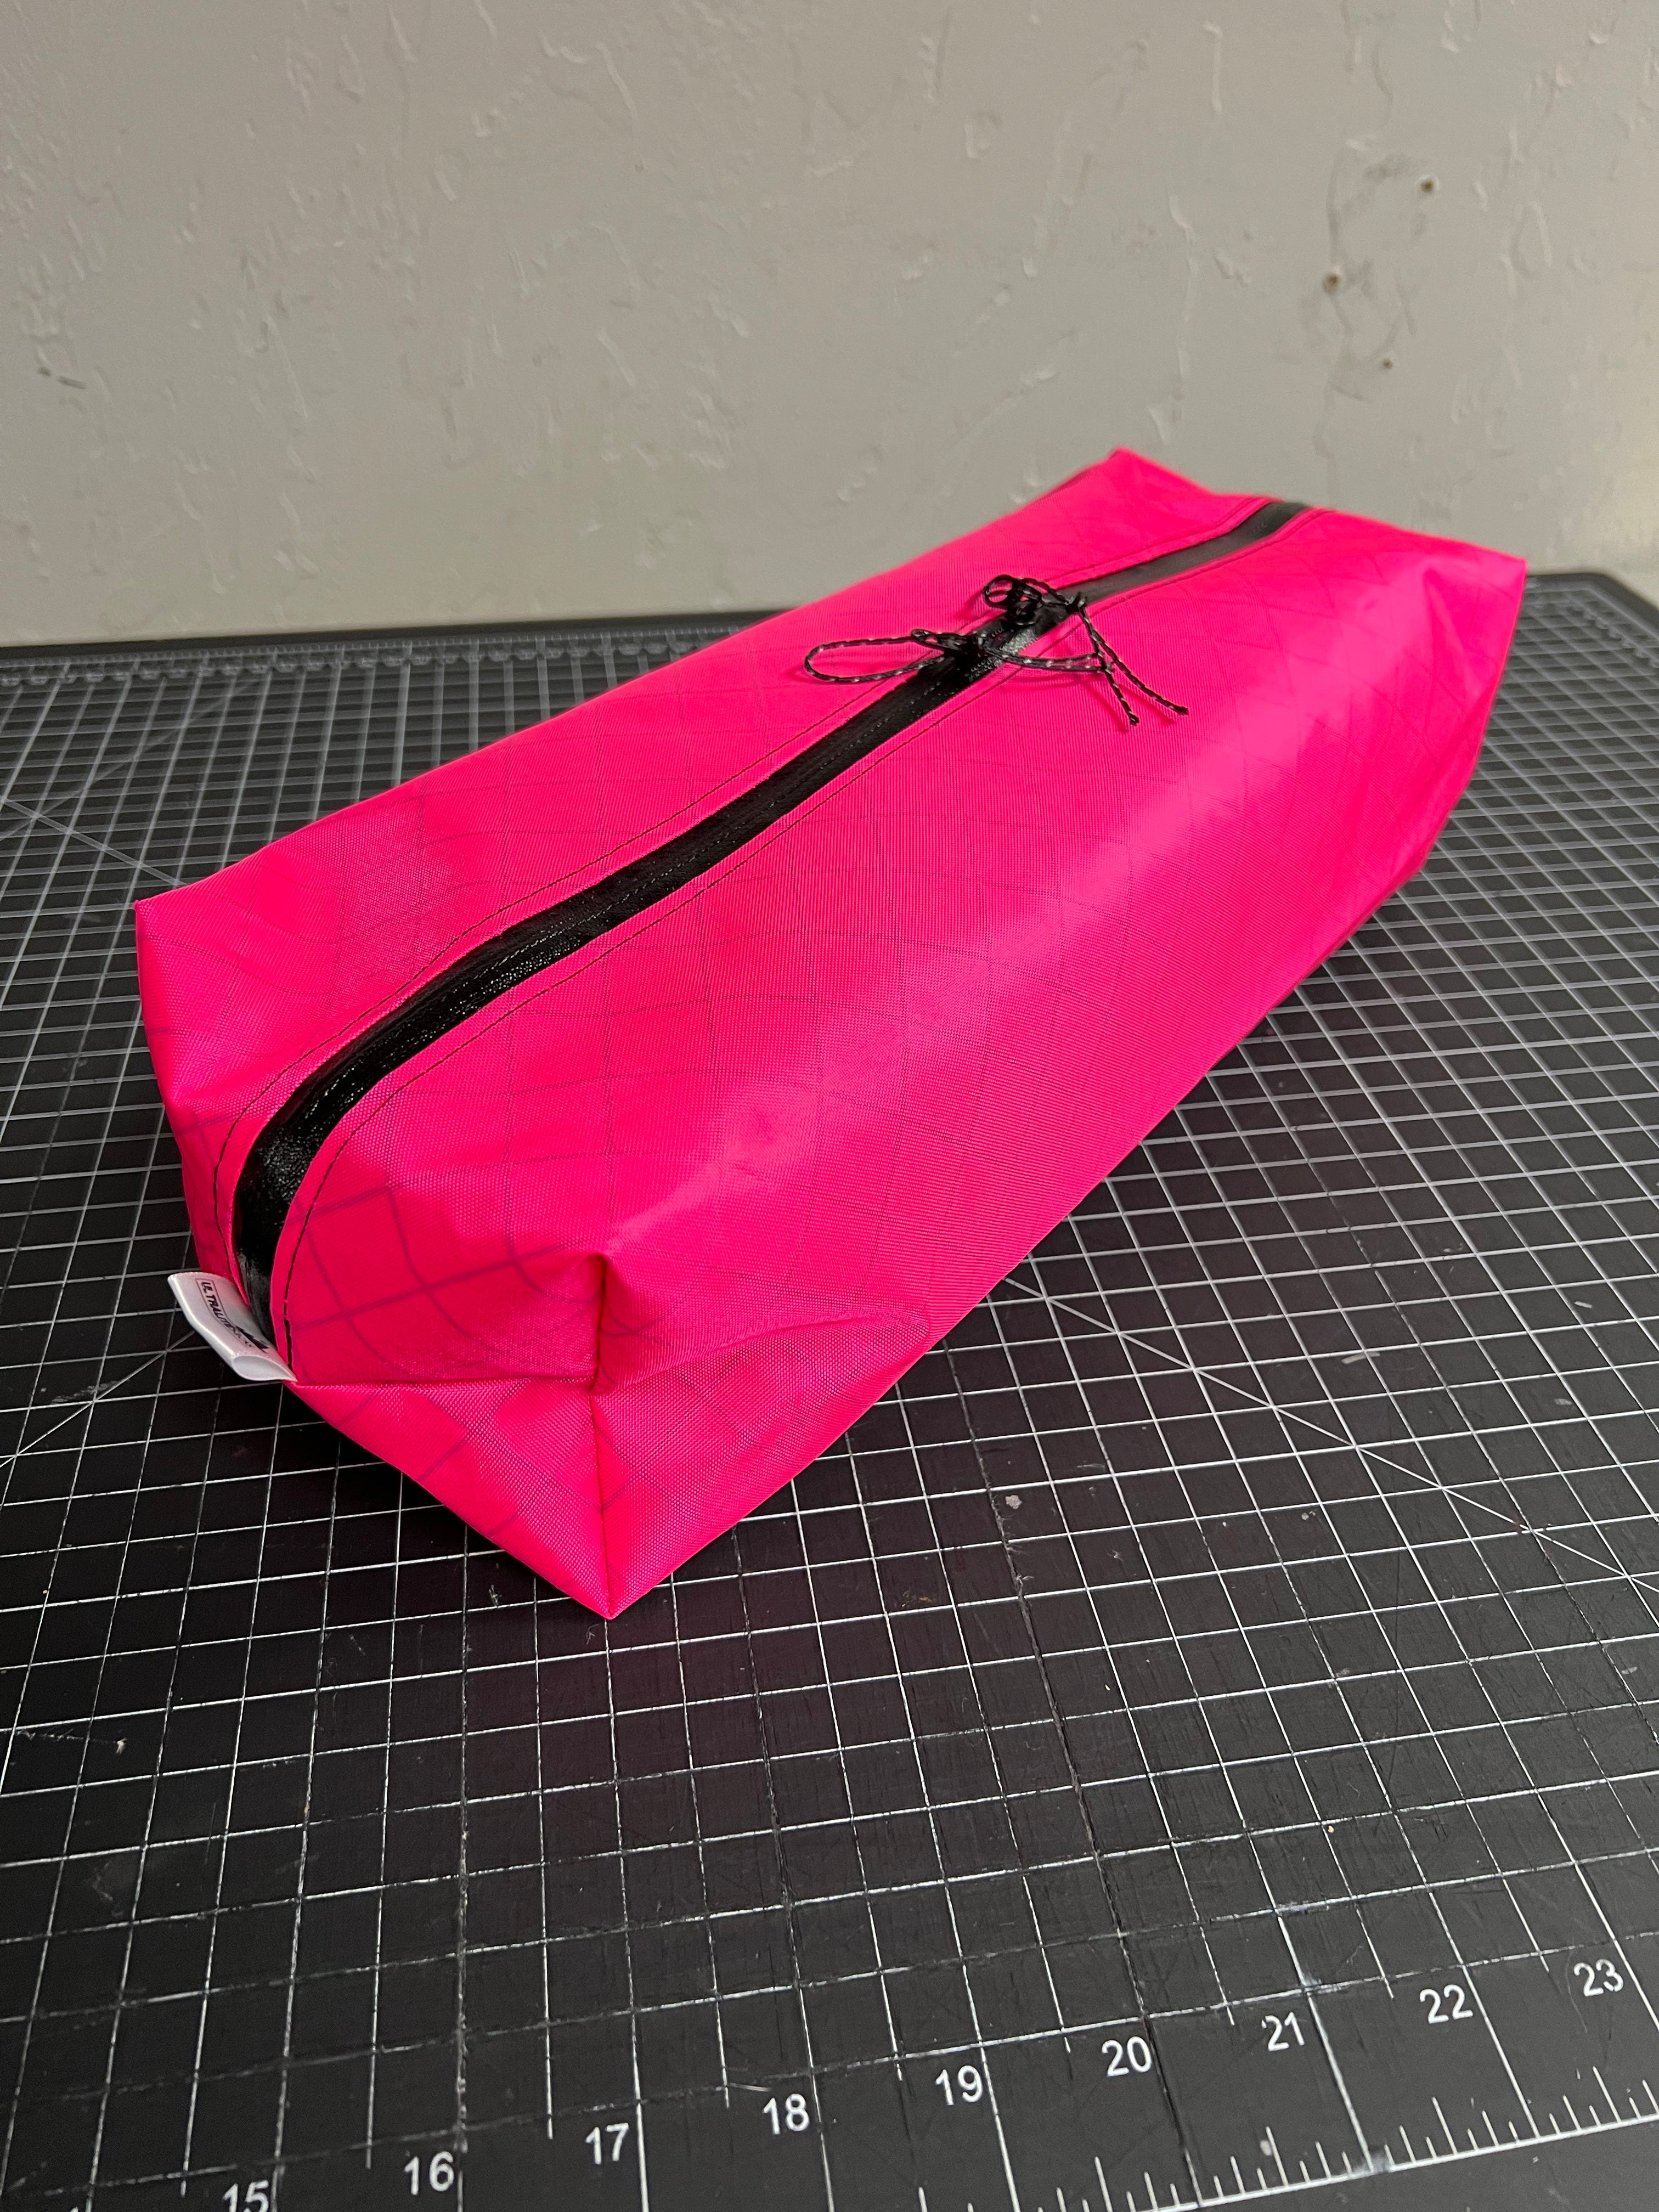 Zippered Cube Ditty Bags - Fully Recycled